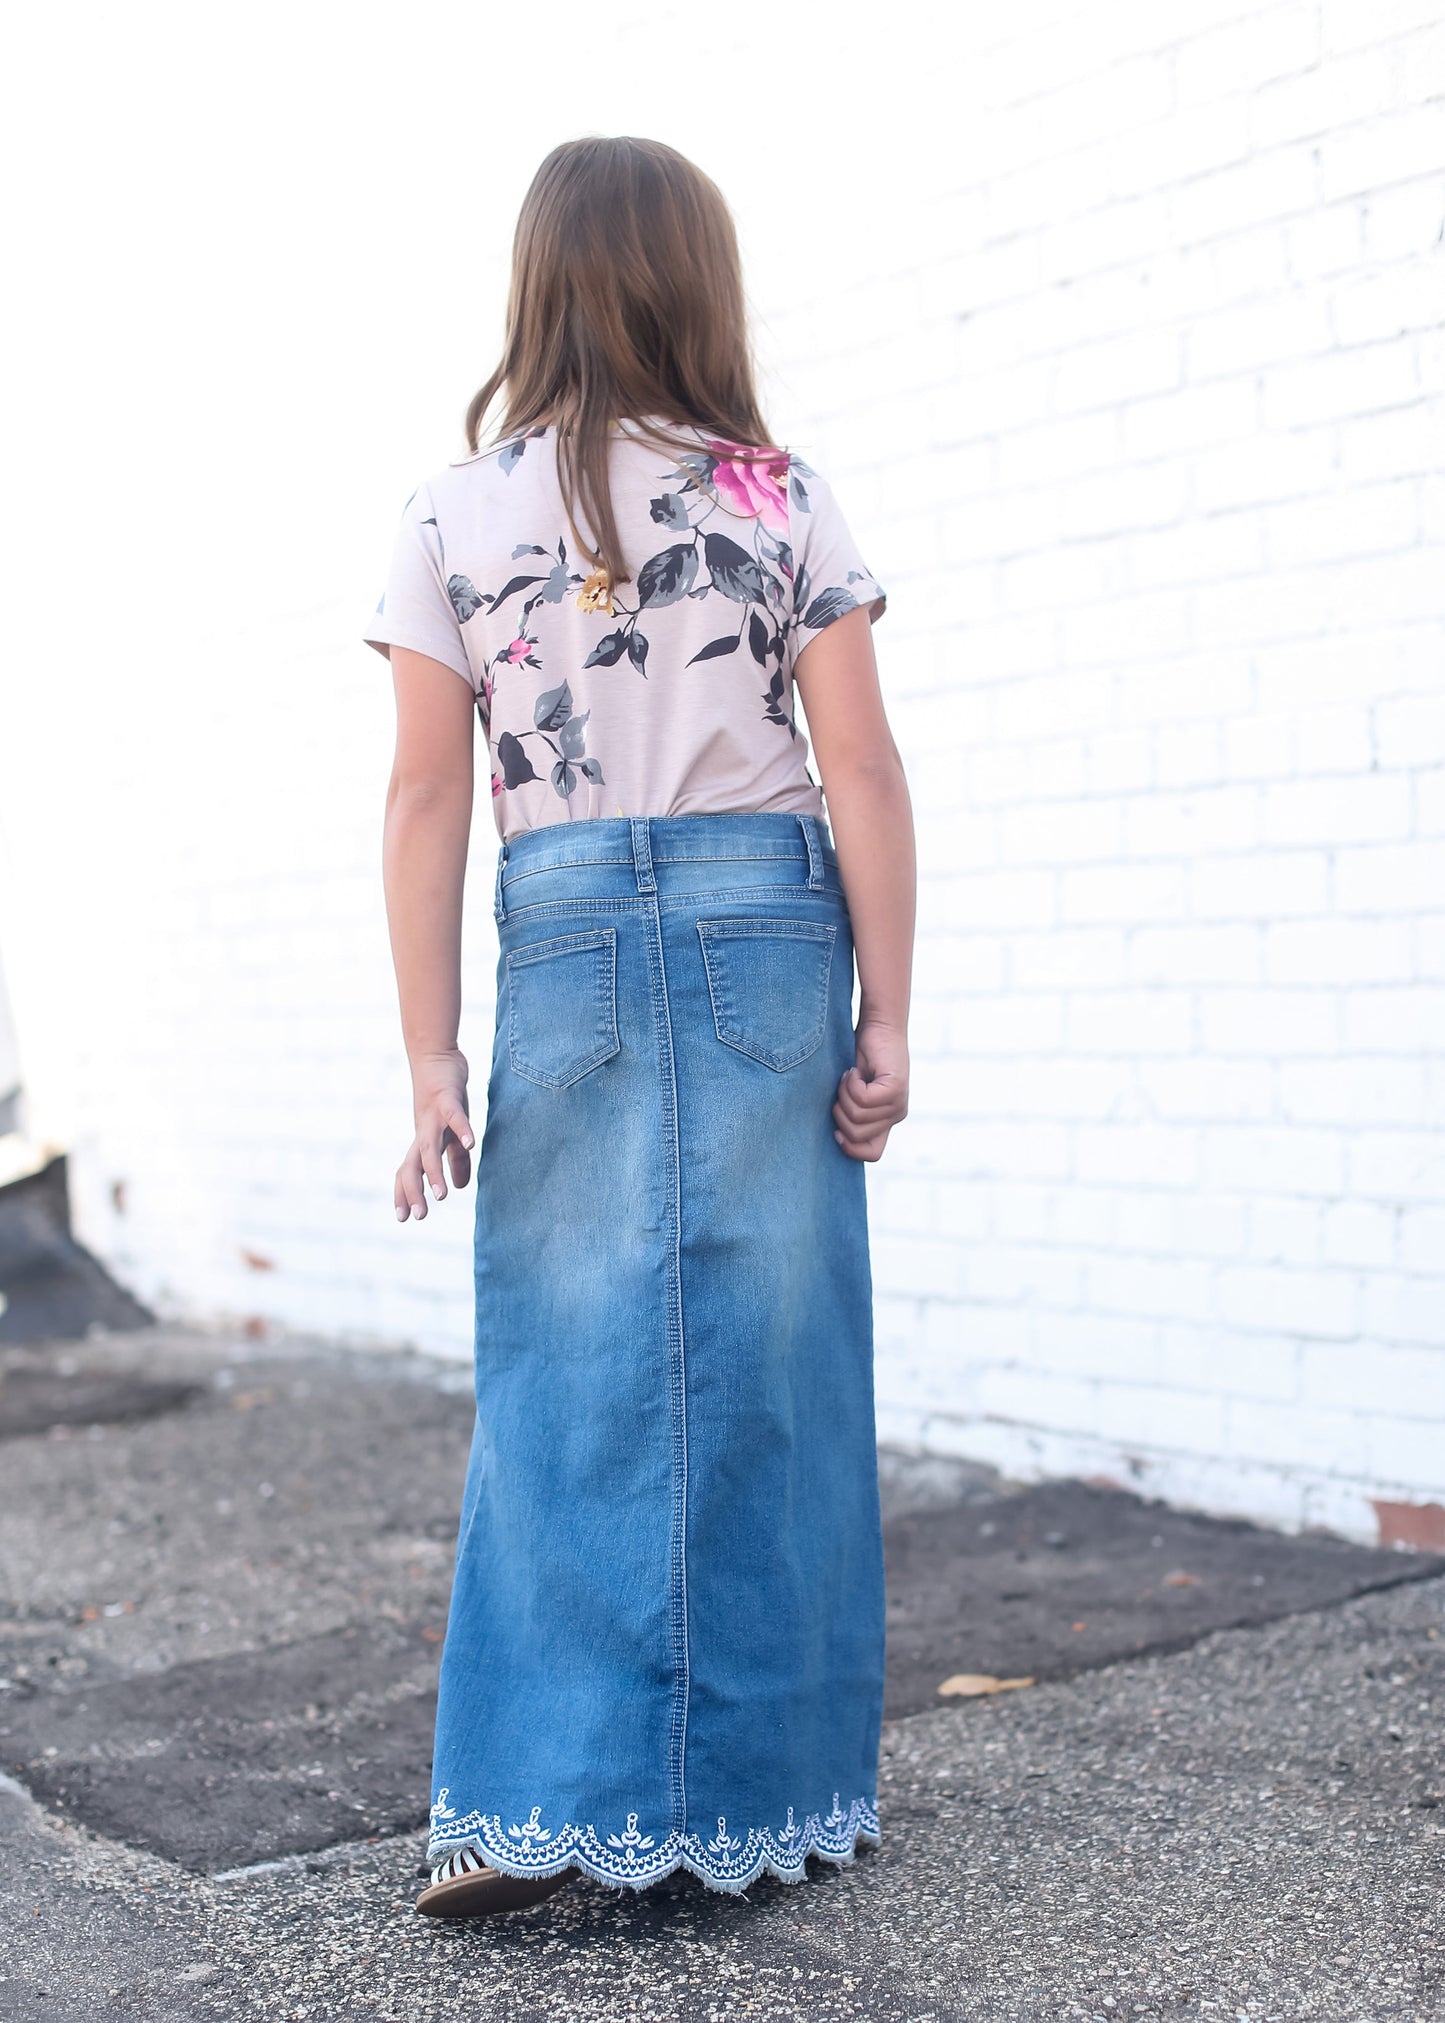 Girls long denim skirt with lace detail and no slit